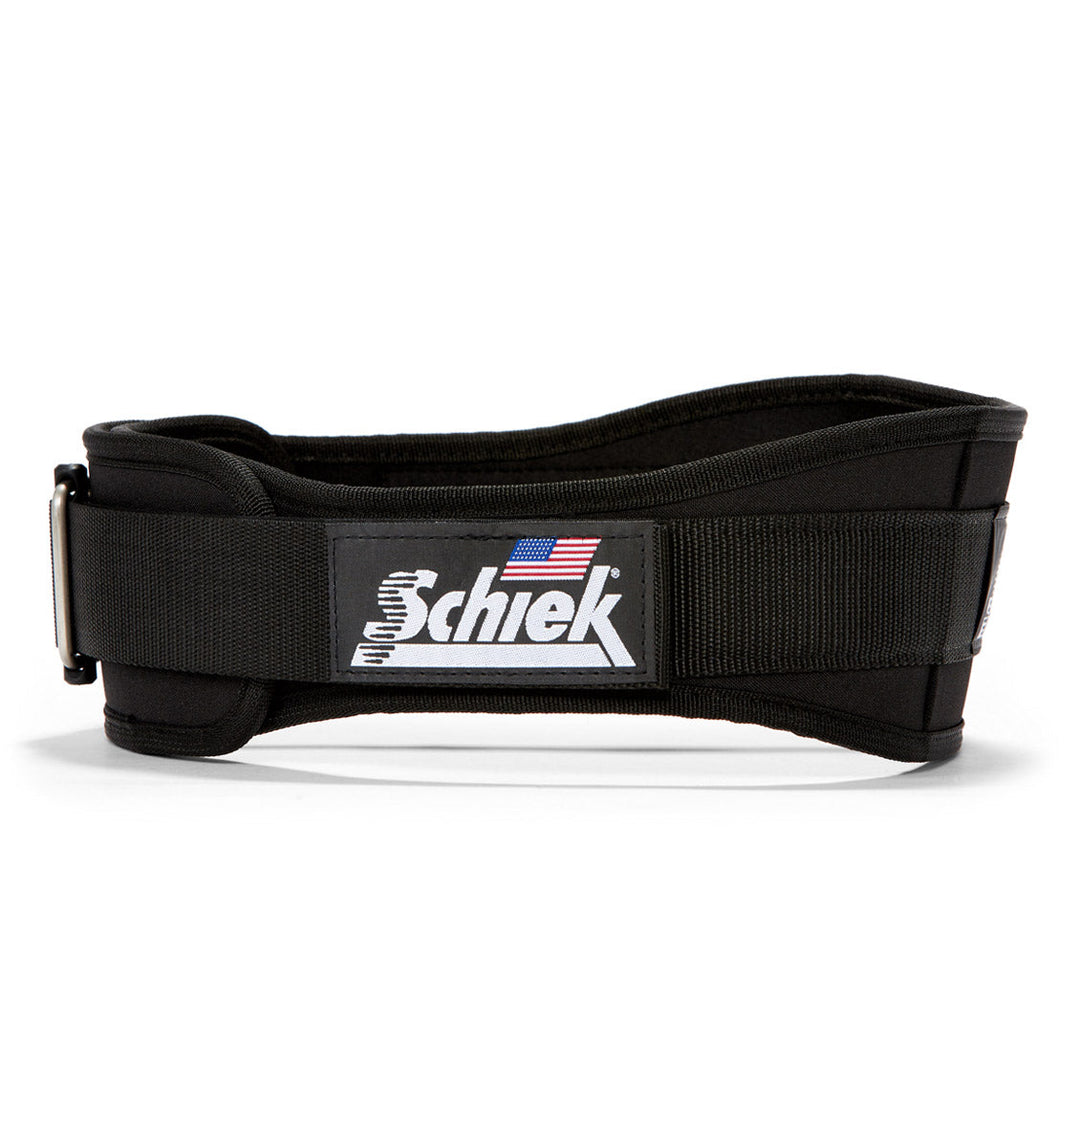 WHAT WORKOUT BELT ADDS COMFORT AND SUPPORT? SCHIEK MODEL 2004, HERE IS WHY...